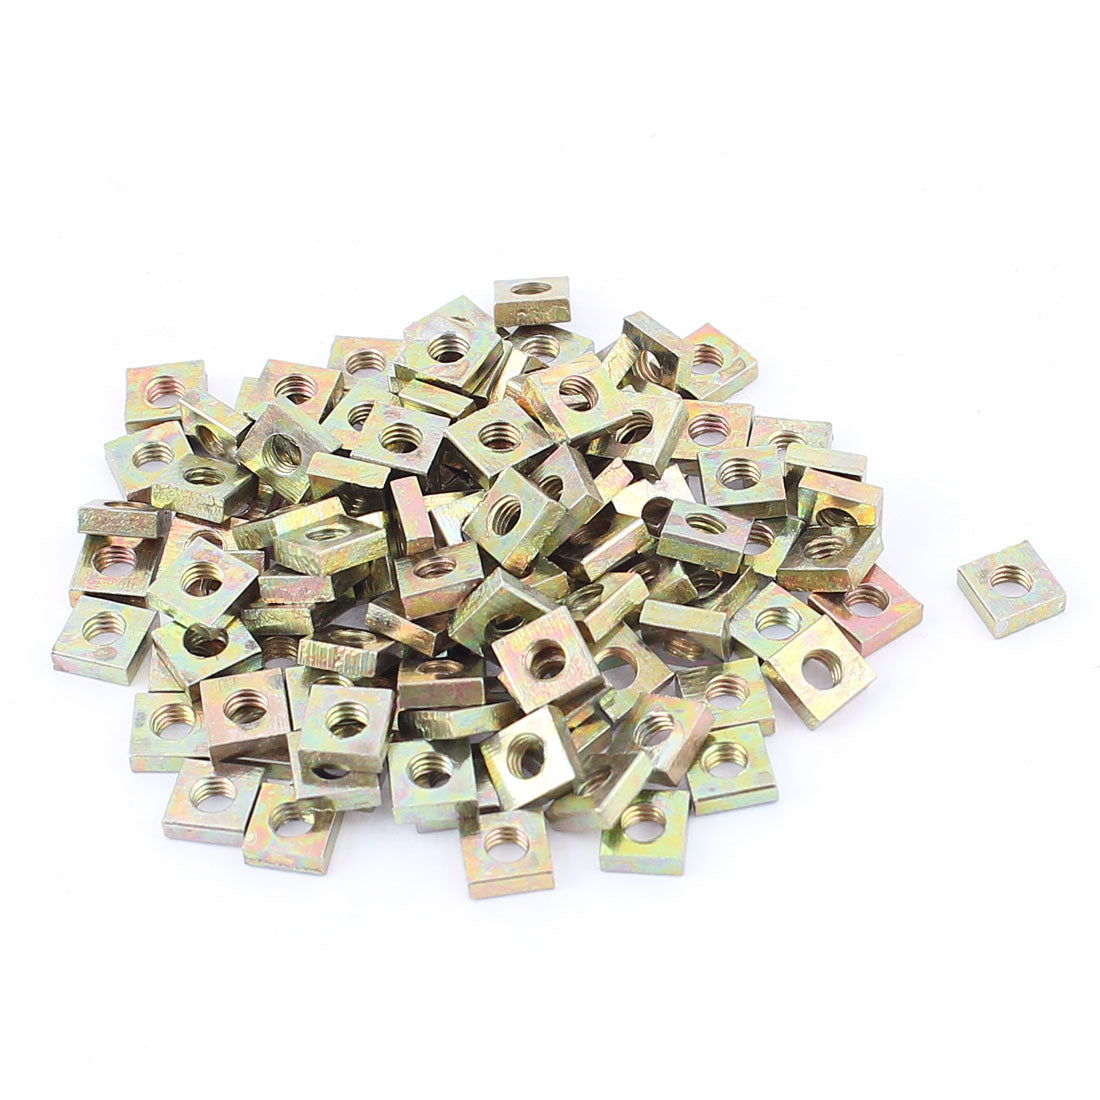 uxcell Uxcell M3x5.5mmx2mm Zinc Plated Square Nuts Bronze Tone 100pcs